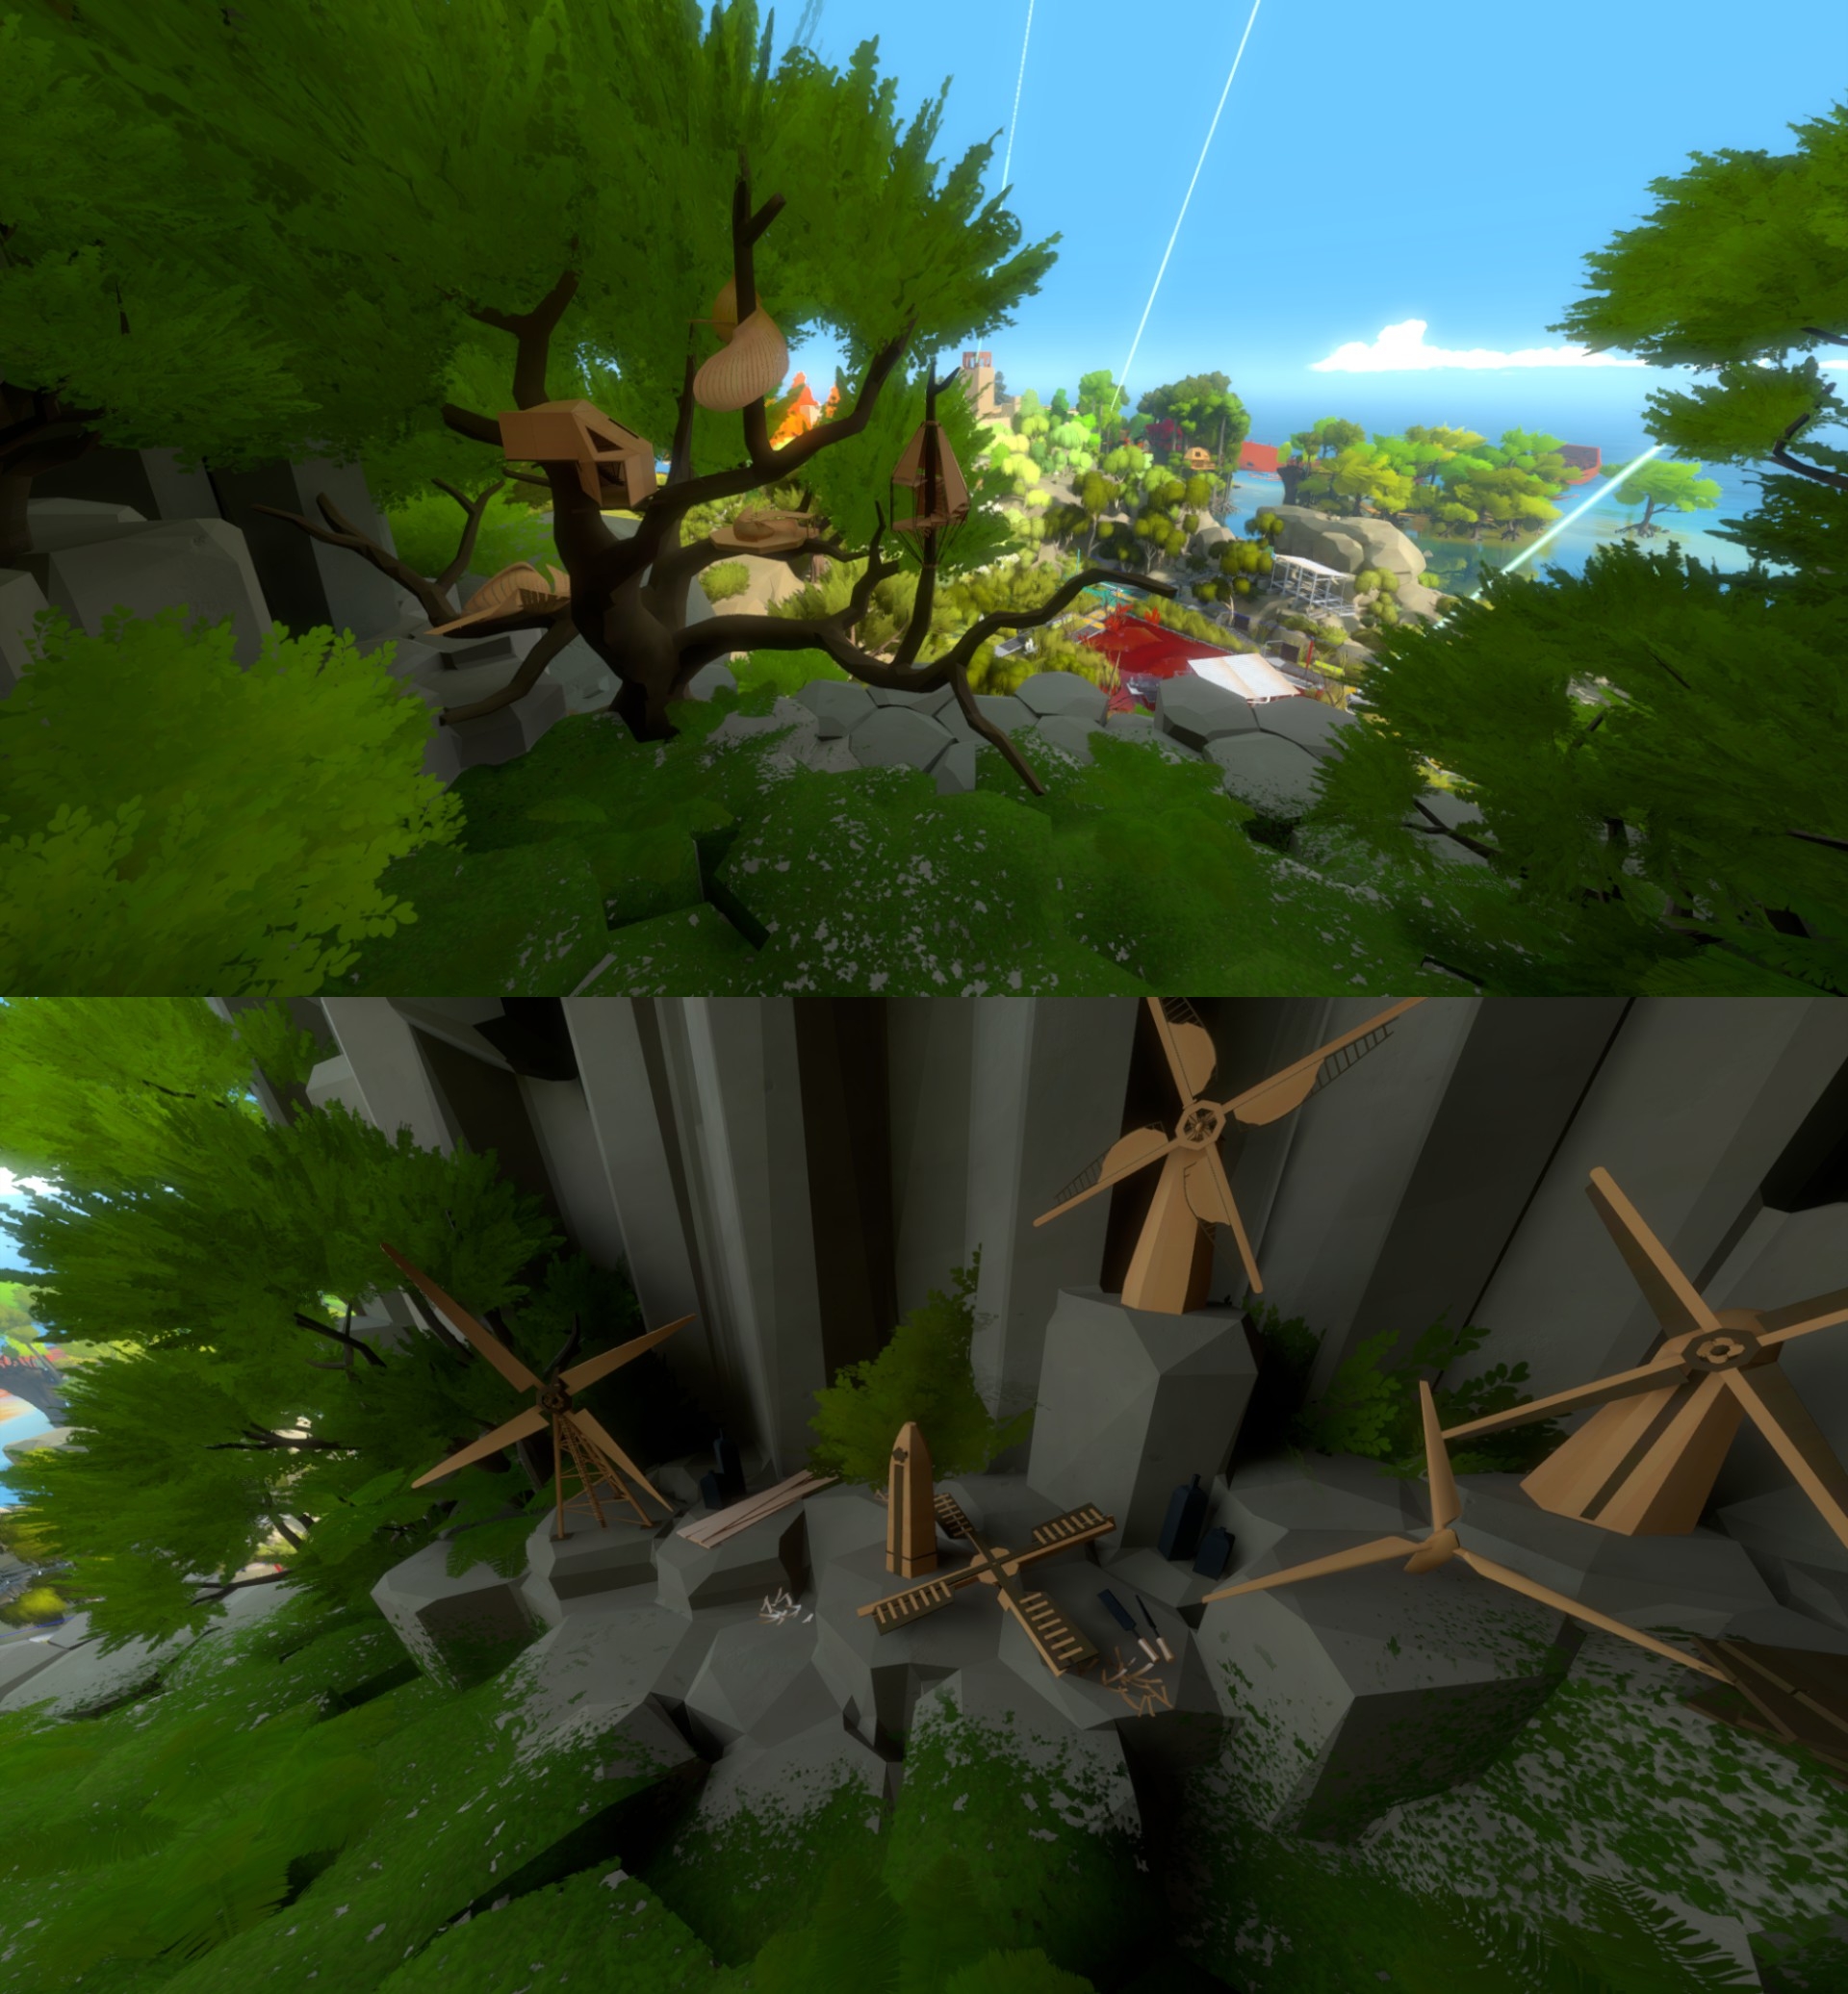 The treehouse and windmill replicas found in a grassy vista overlooking the island.